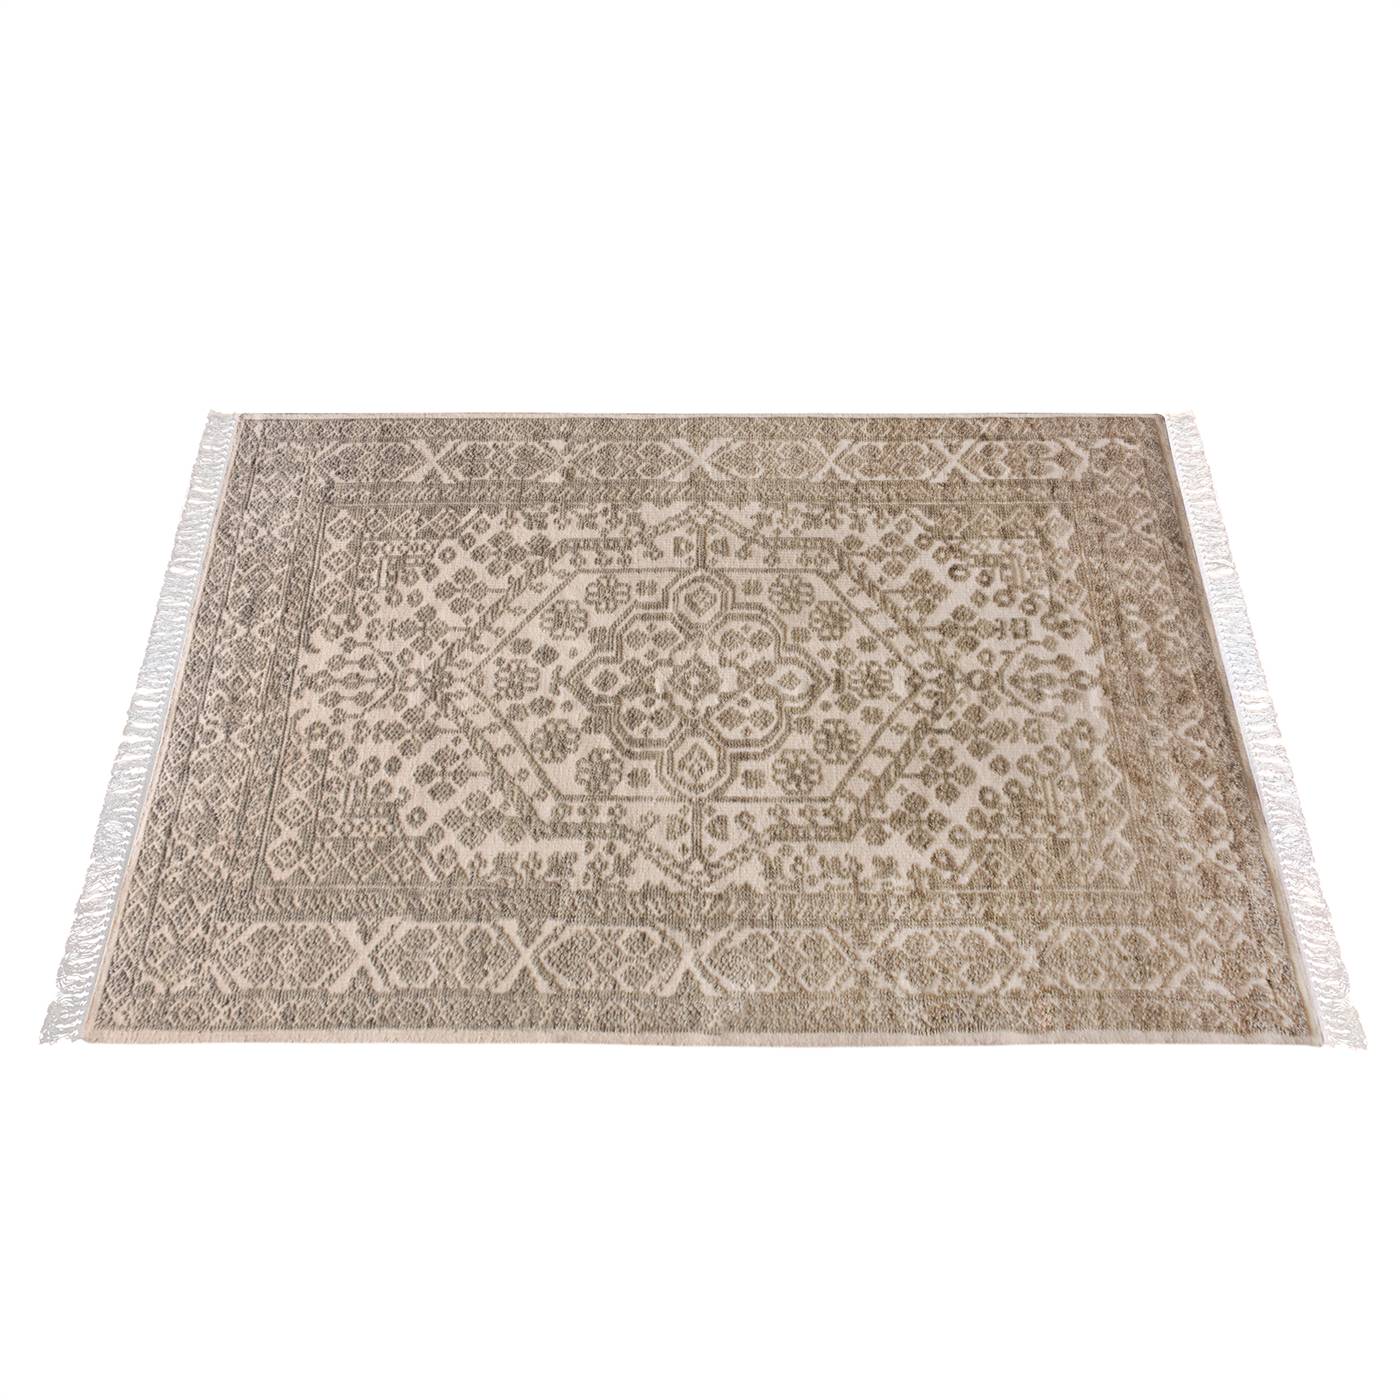 Area Rug, Bedroom Rug, Living Room Rug, Living Area Rug, Indian Rug, Office Carpet, Office Rug, Shop Rug Online, Grey, Wool, Hand Knotted , Handknotted, All Cut, Contemporary 